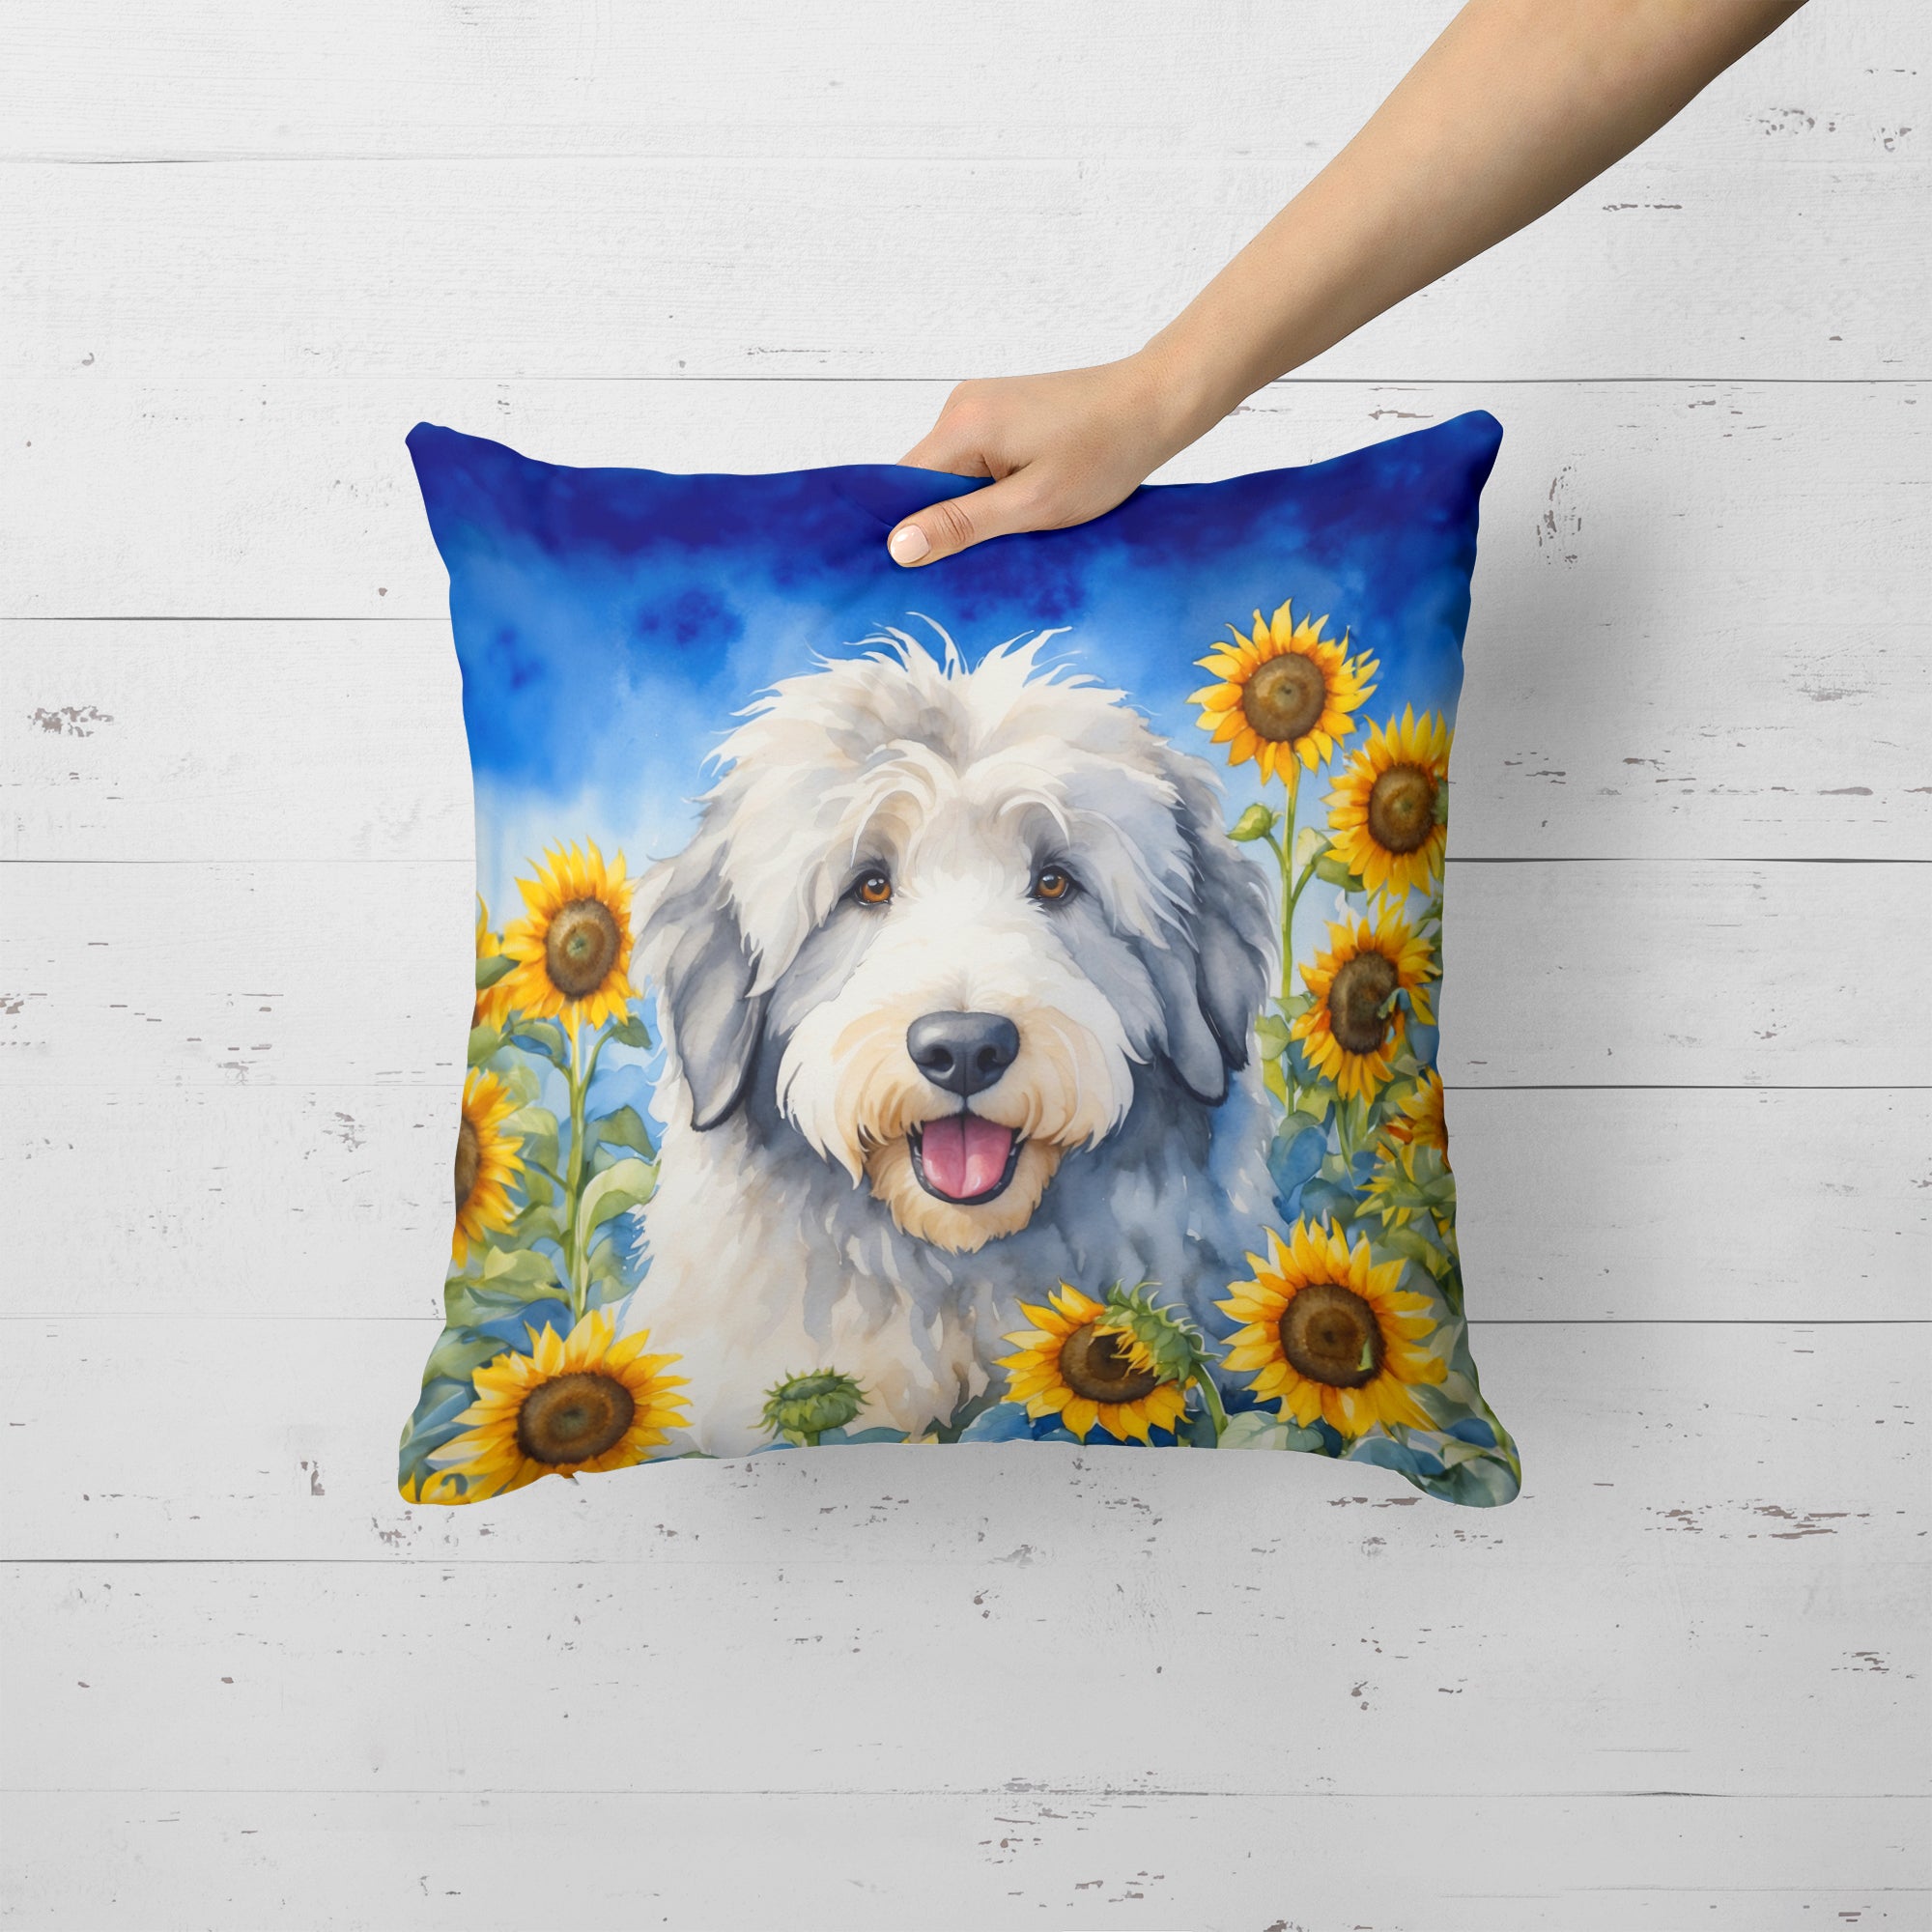 Buy this Old English Sheepdog in Sunflowers Throw Pillow